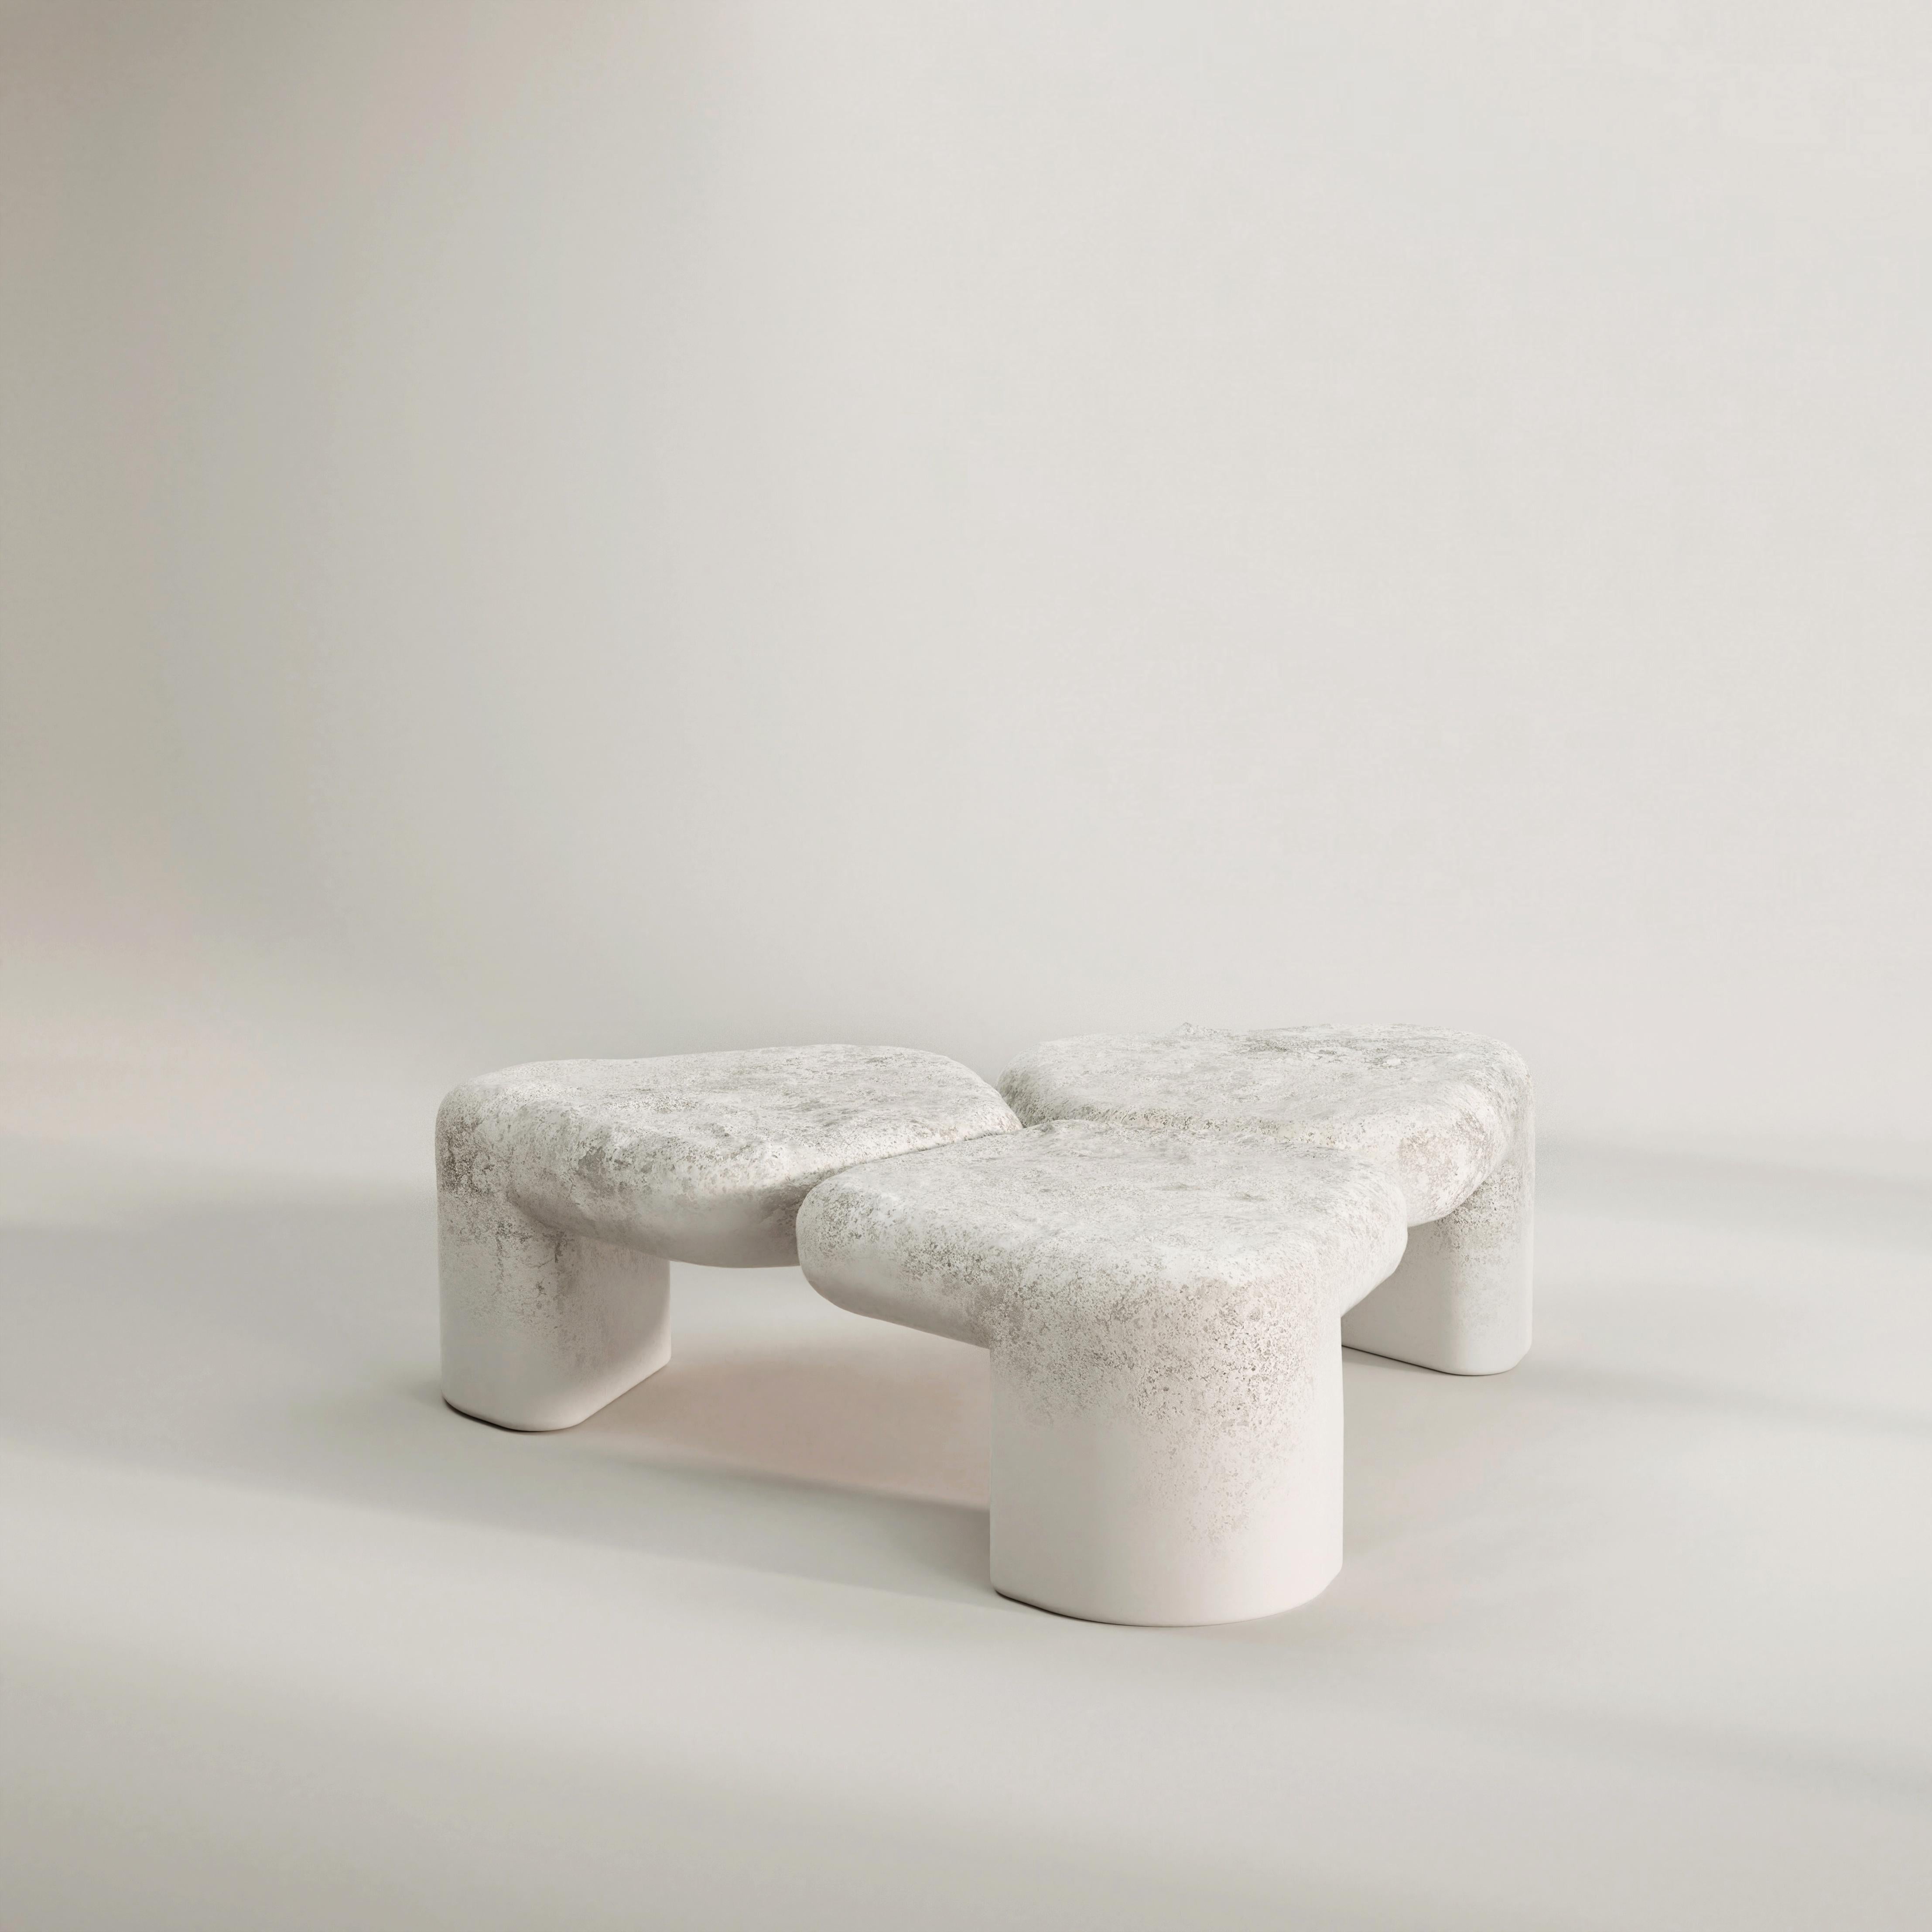 Trinity coffee table by Pietro Franceschini.
Dimensions: W 119 x L 107 x H 34 cm.
Materials: Plaster.

Pietro Franceschini is an architect and designer based in New York and Florence. He was educated in Italy, Portugal and United States. After